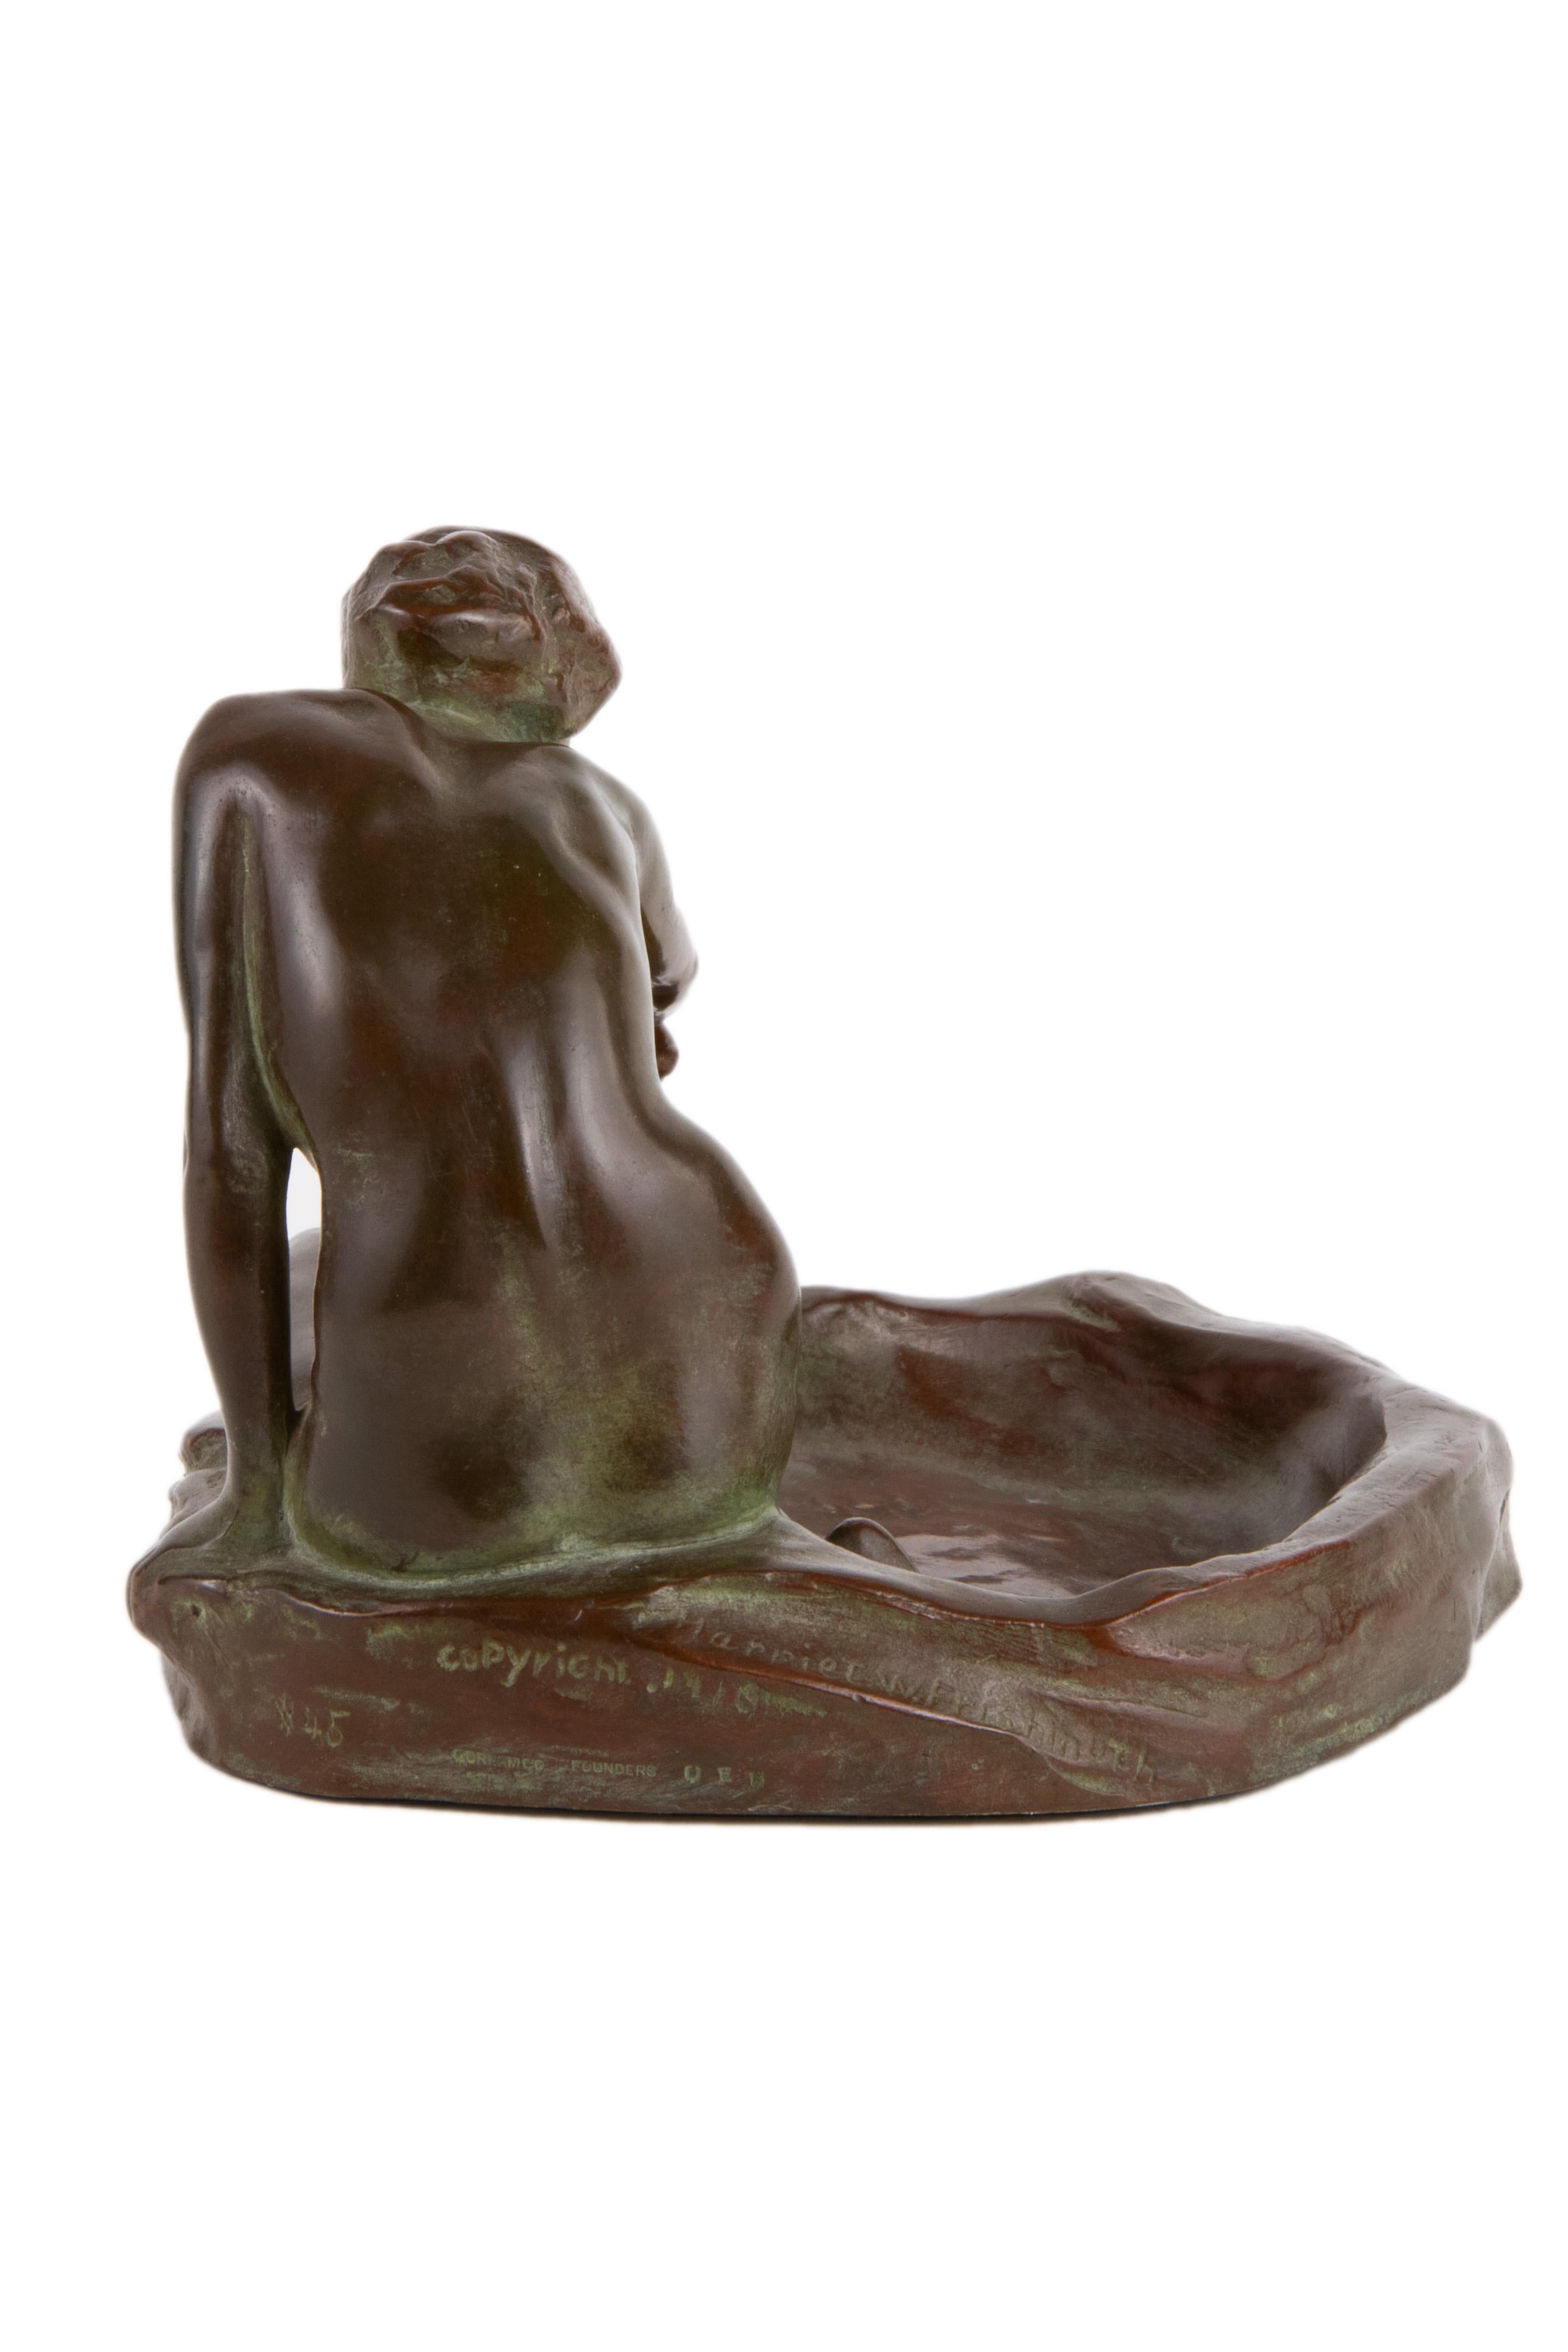 20th Century Girl with Frog American Art Nouveau Sculpture by, Harriet Whitney Frishmuth